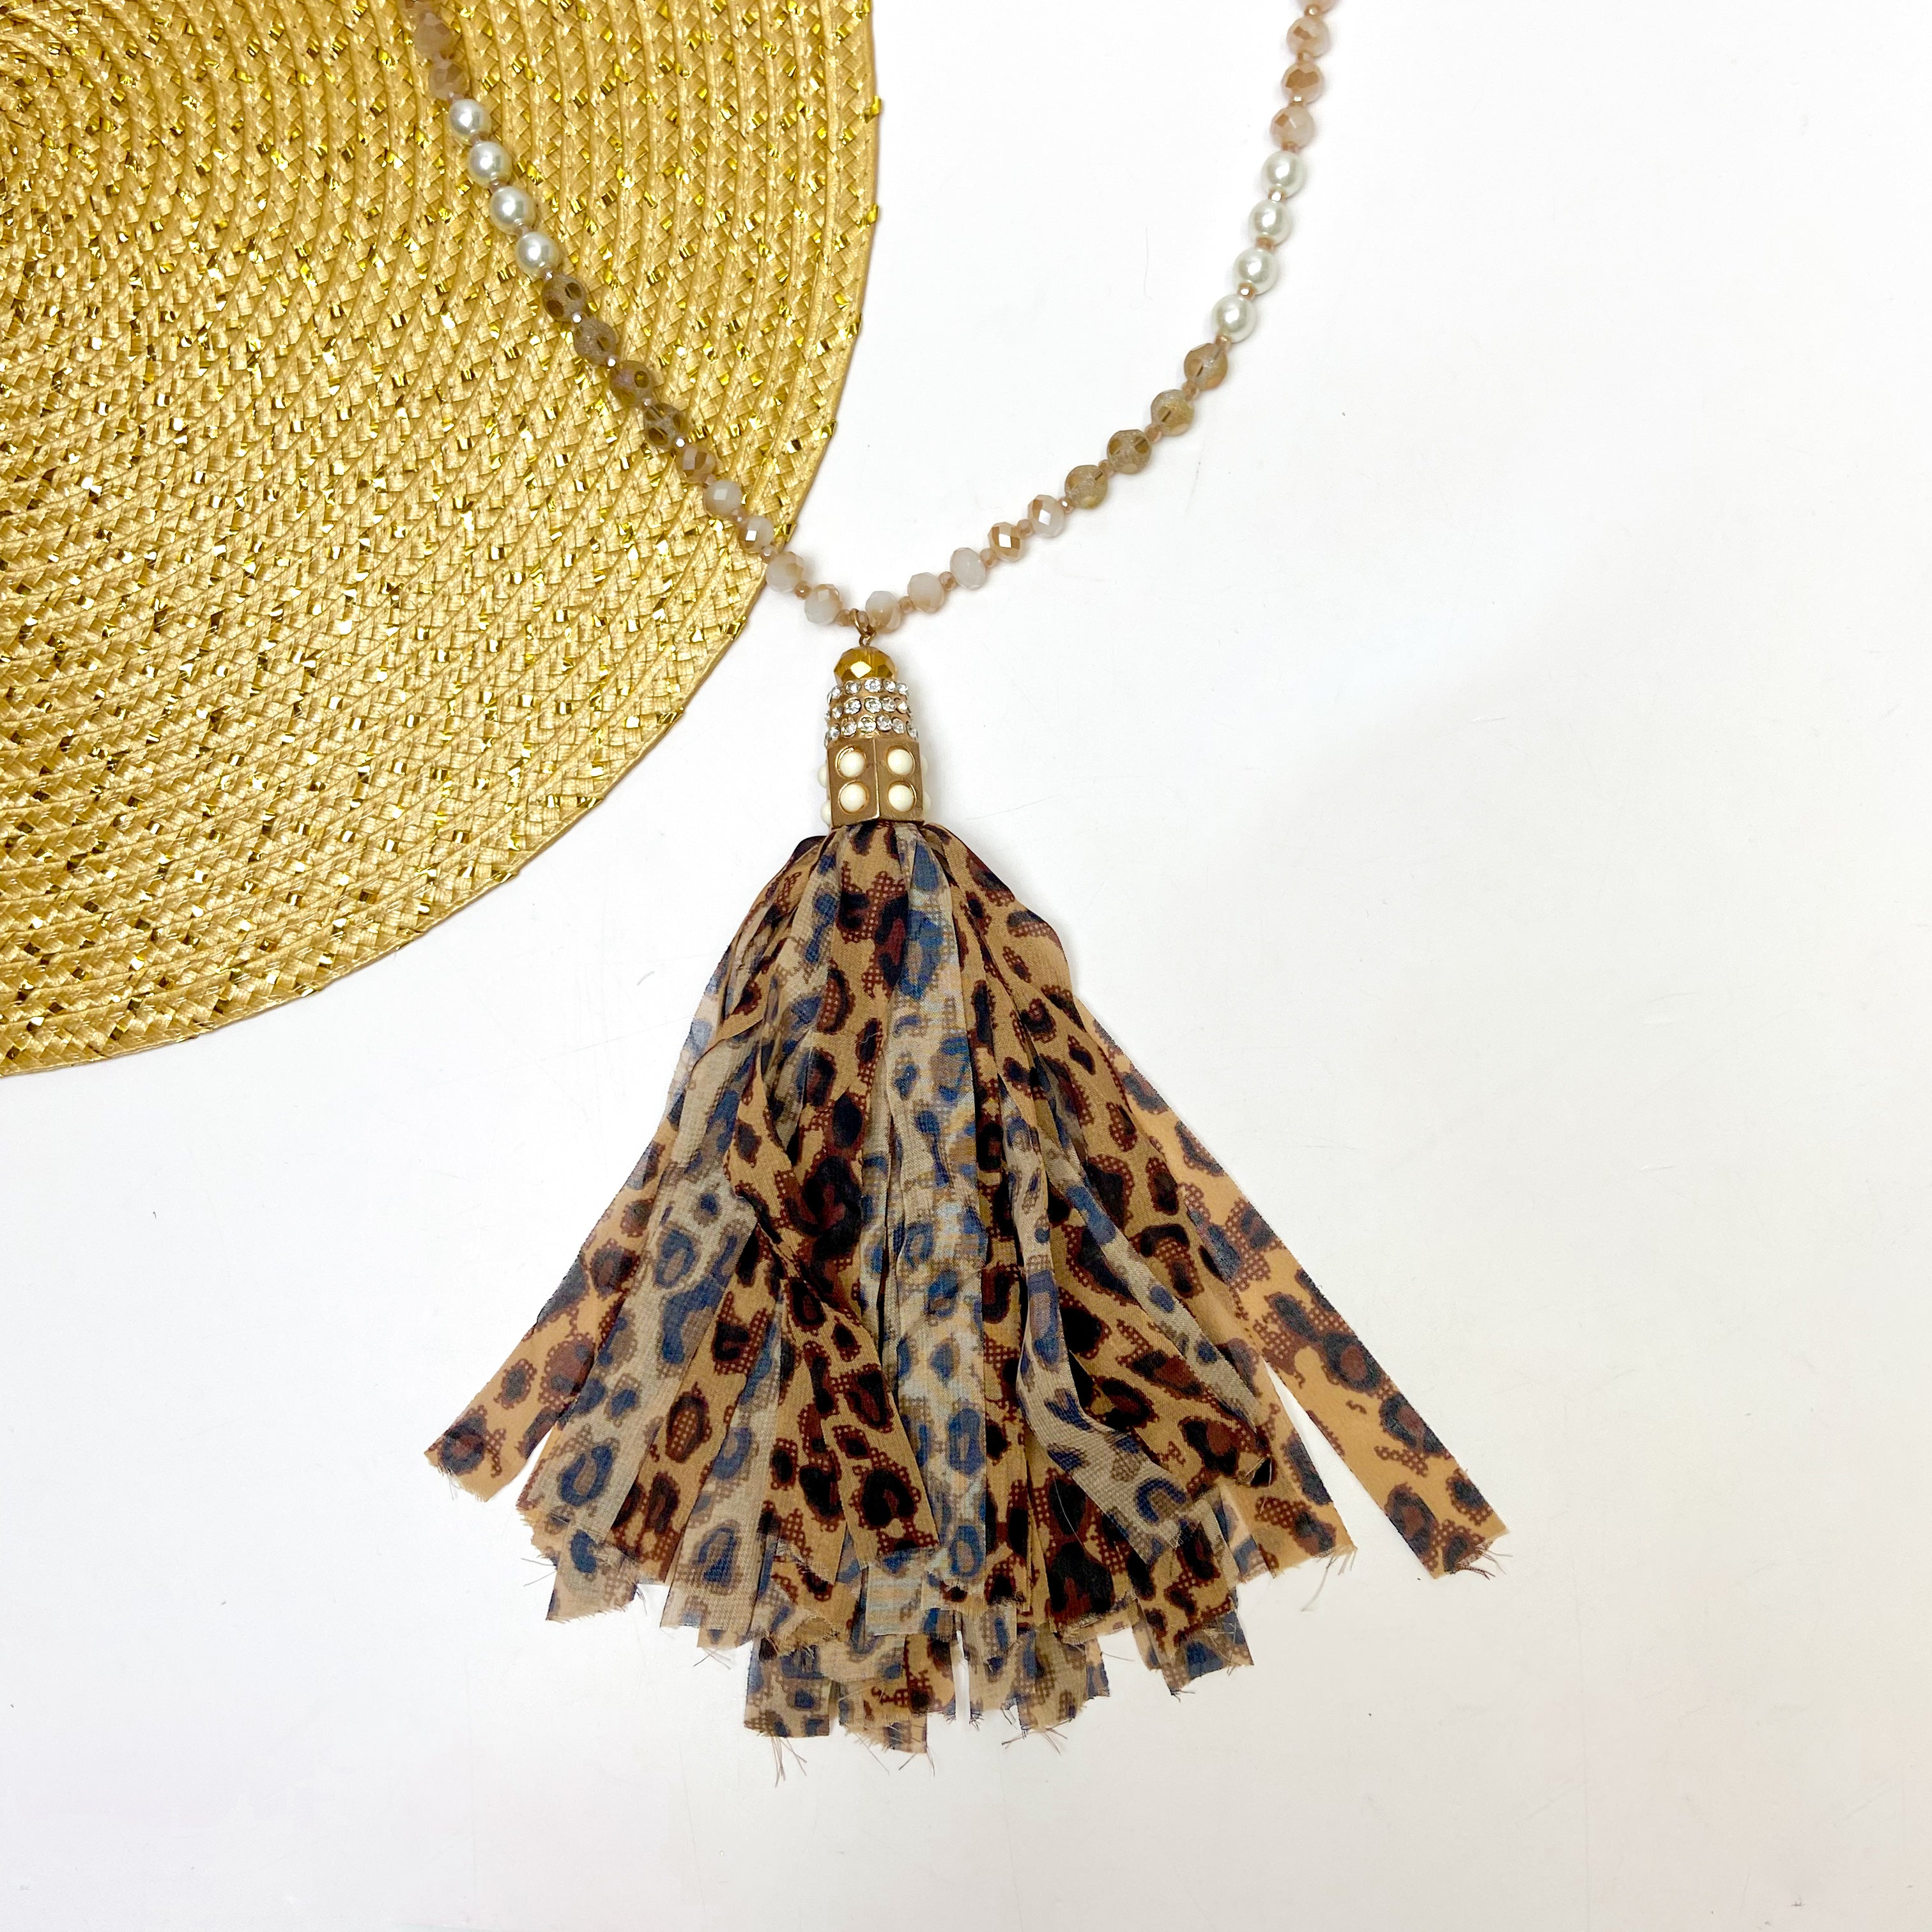 Crystal Bead and Pearl Necklace with Leopard Print Tassel